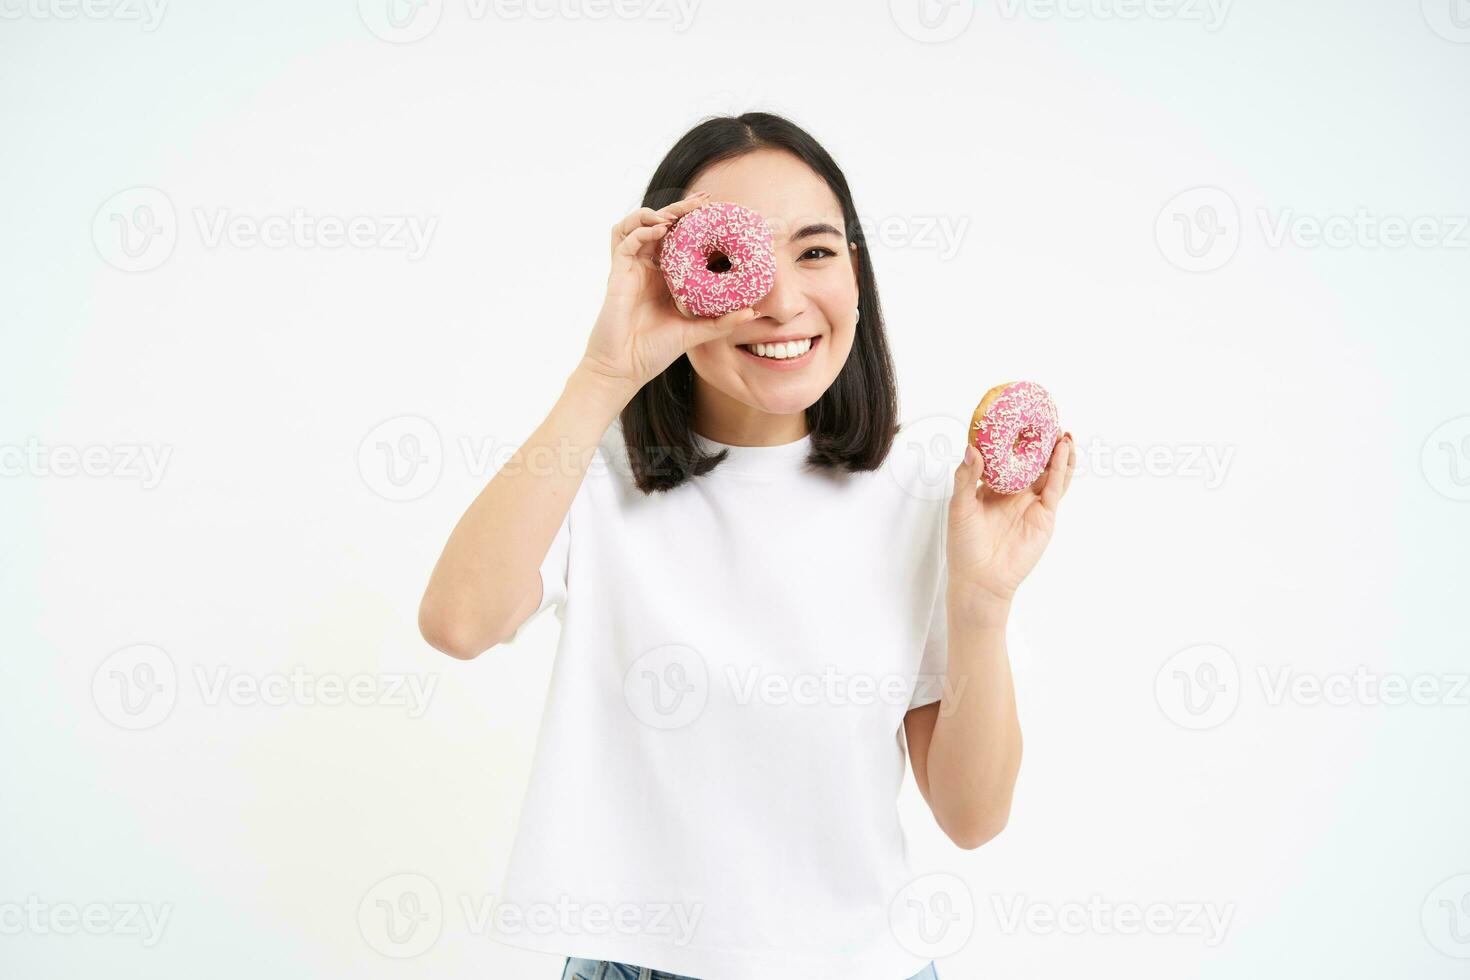 Cute smiling korean woman, looks through doughnut holes, eating tasty donnuts, isolated over white background photo